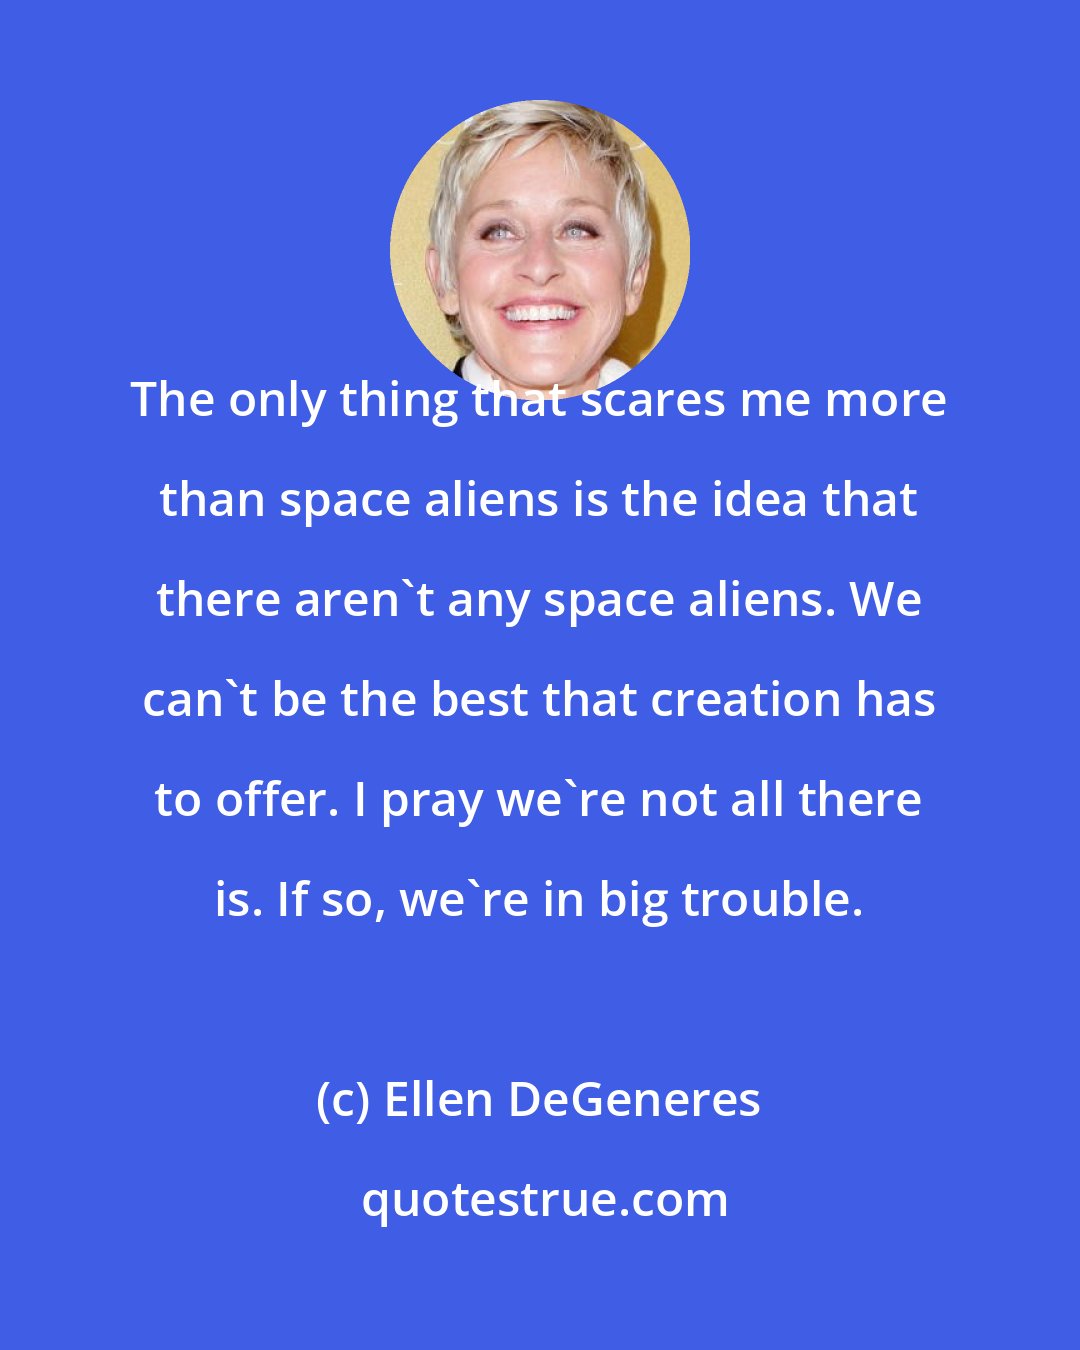 Ellen DeGeneres: The only thing that scares me more than space aliens is the idea that there aren't any space aliens. We can't be the best that creation has to offer. I pray we're not all there is. If so, we're in big trouble.